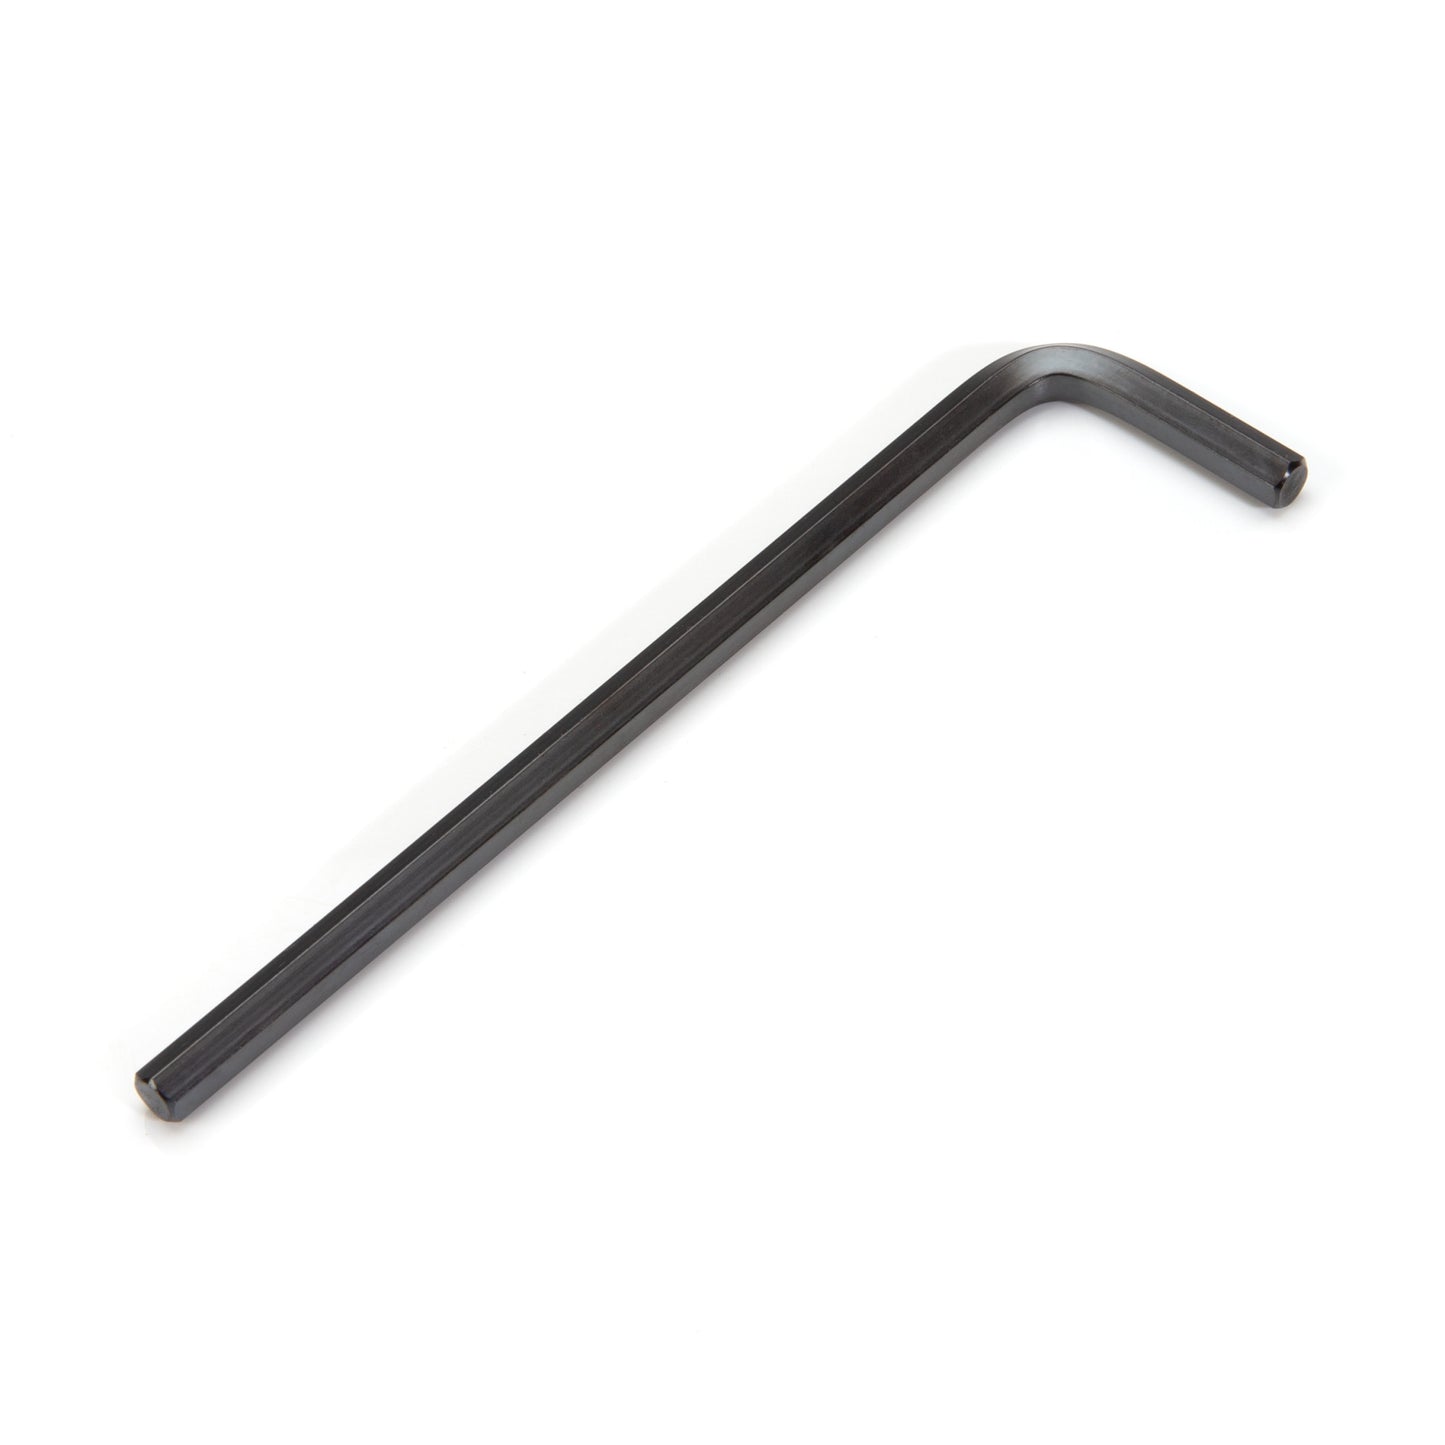 5.25-Inch Long Arm 7/32-Inch SAE L-Style Hex Key